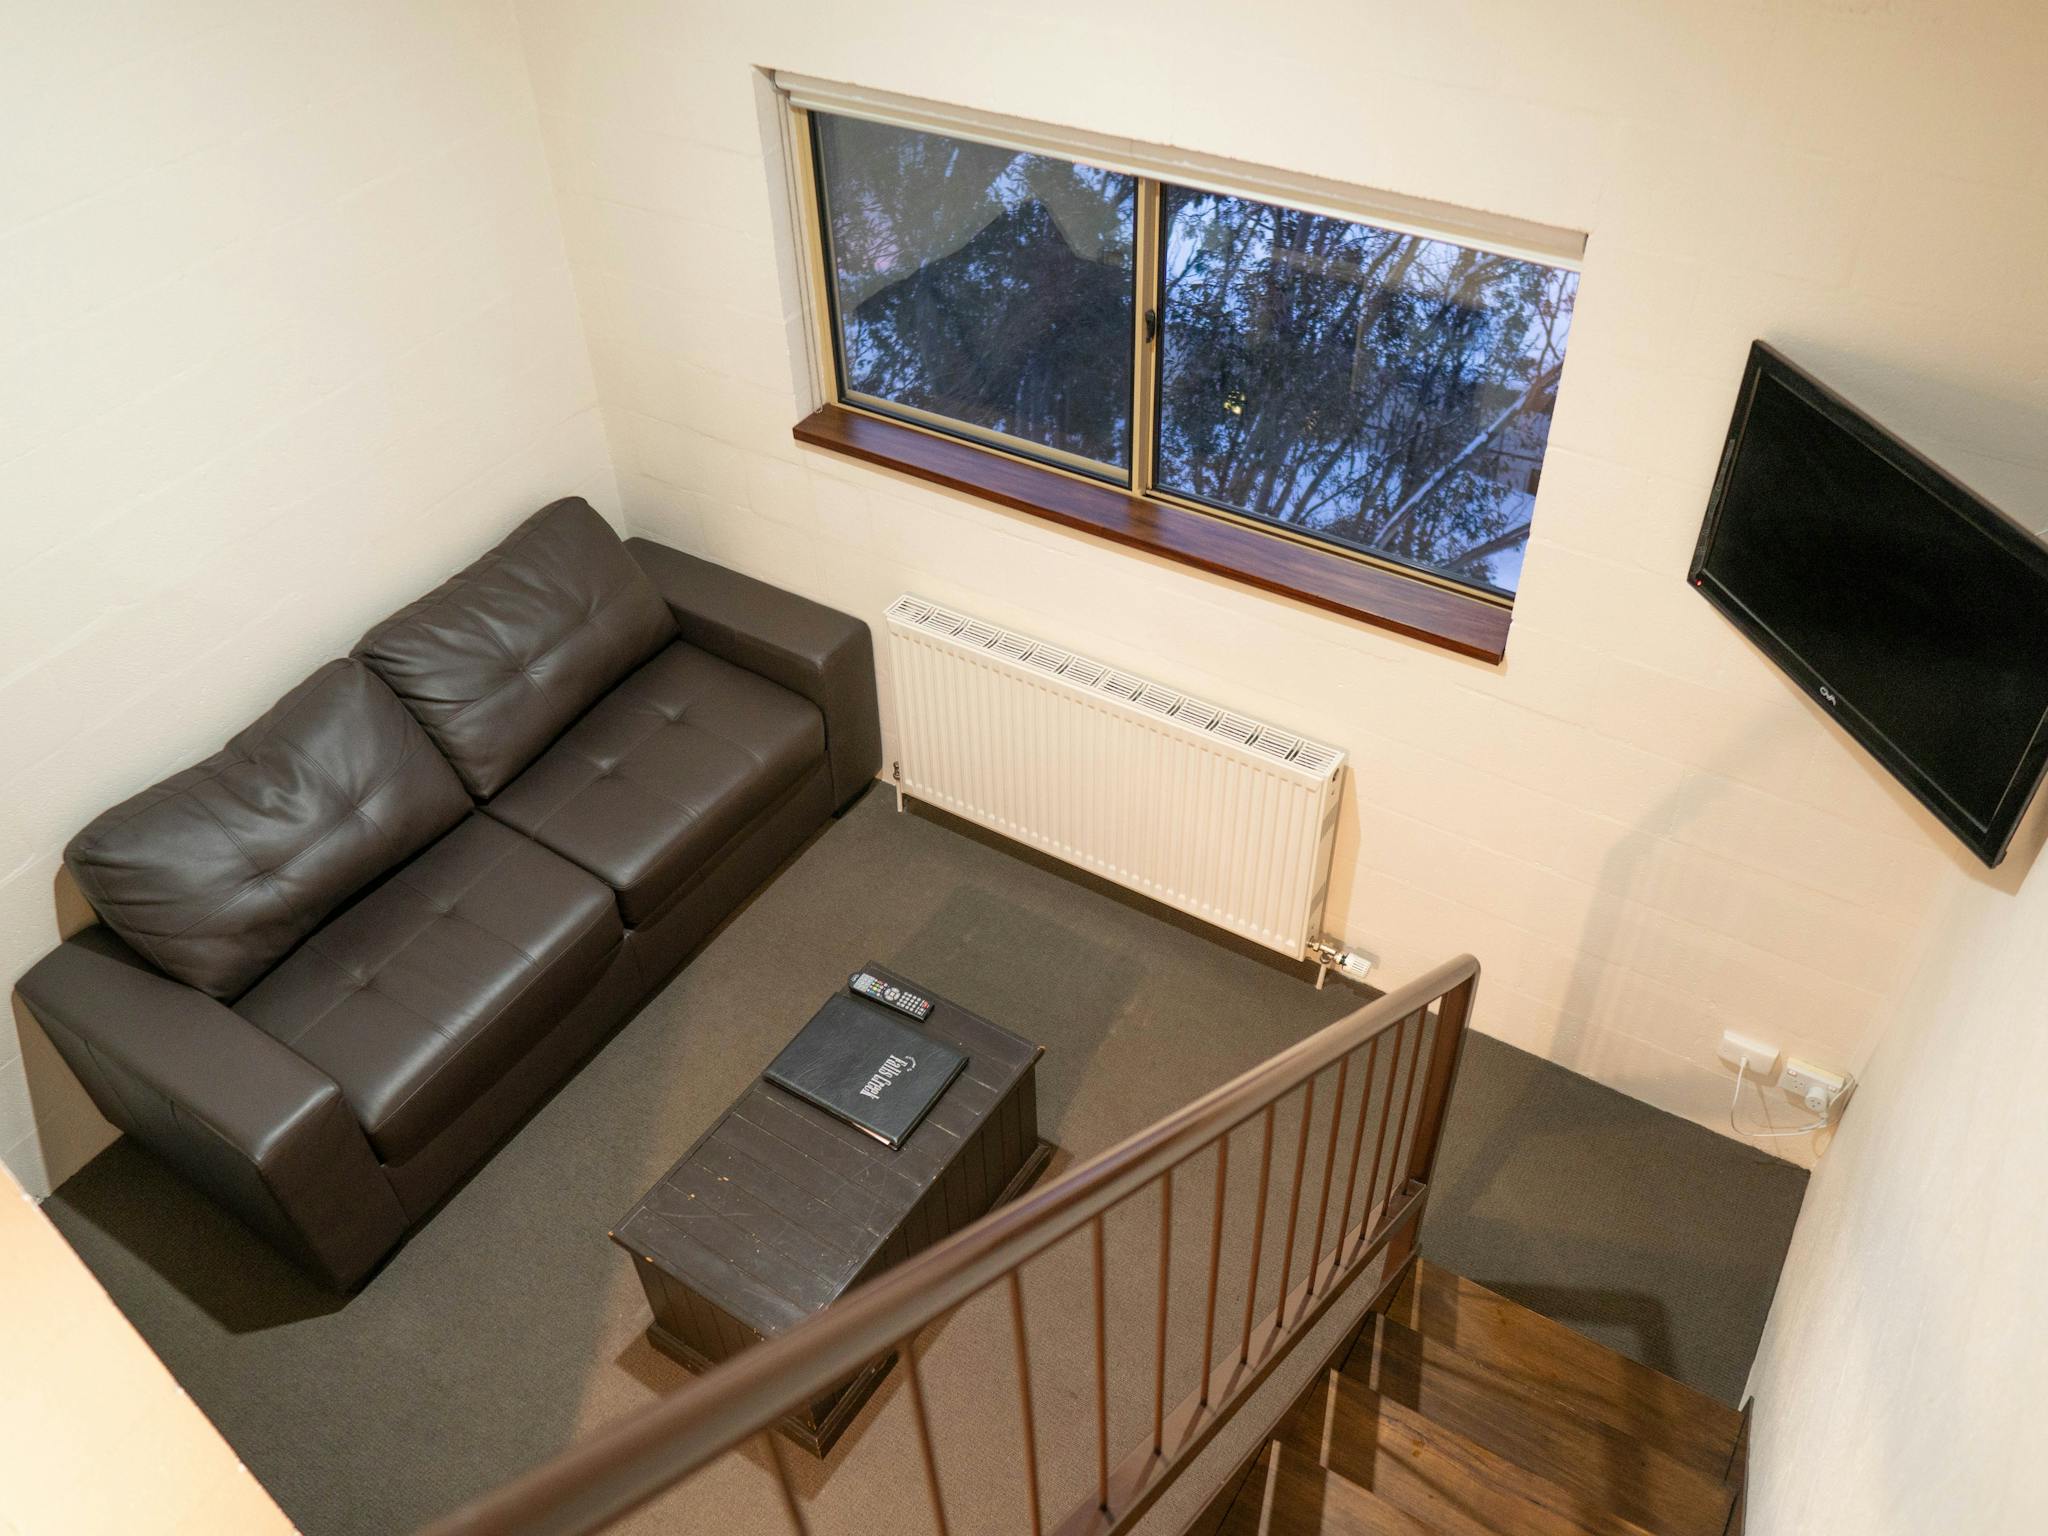 Mezzanine Stairs showing Sitting Room, Stairs, Window and TV